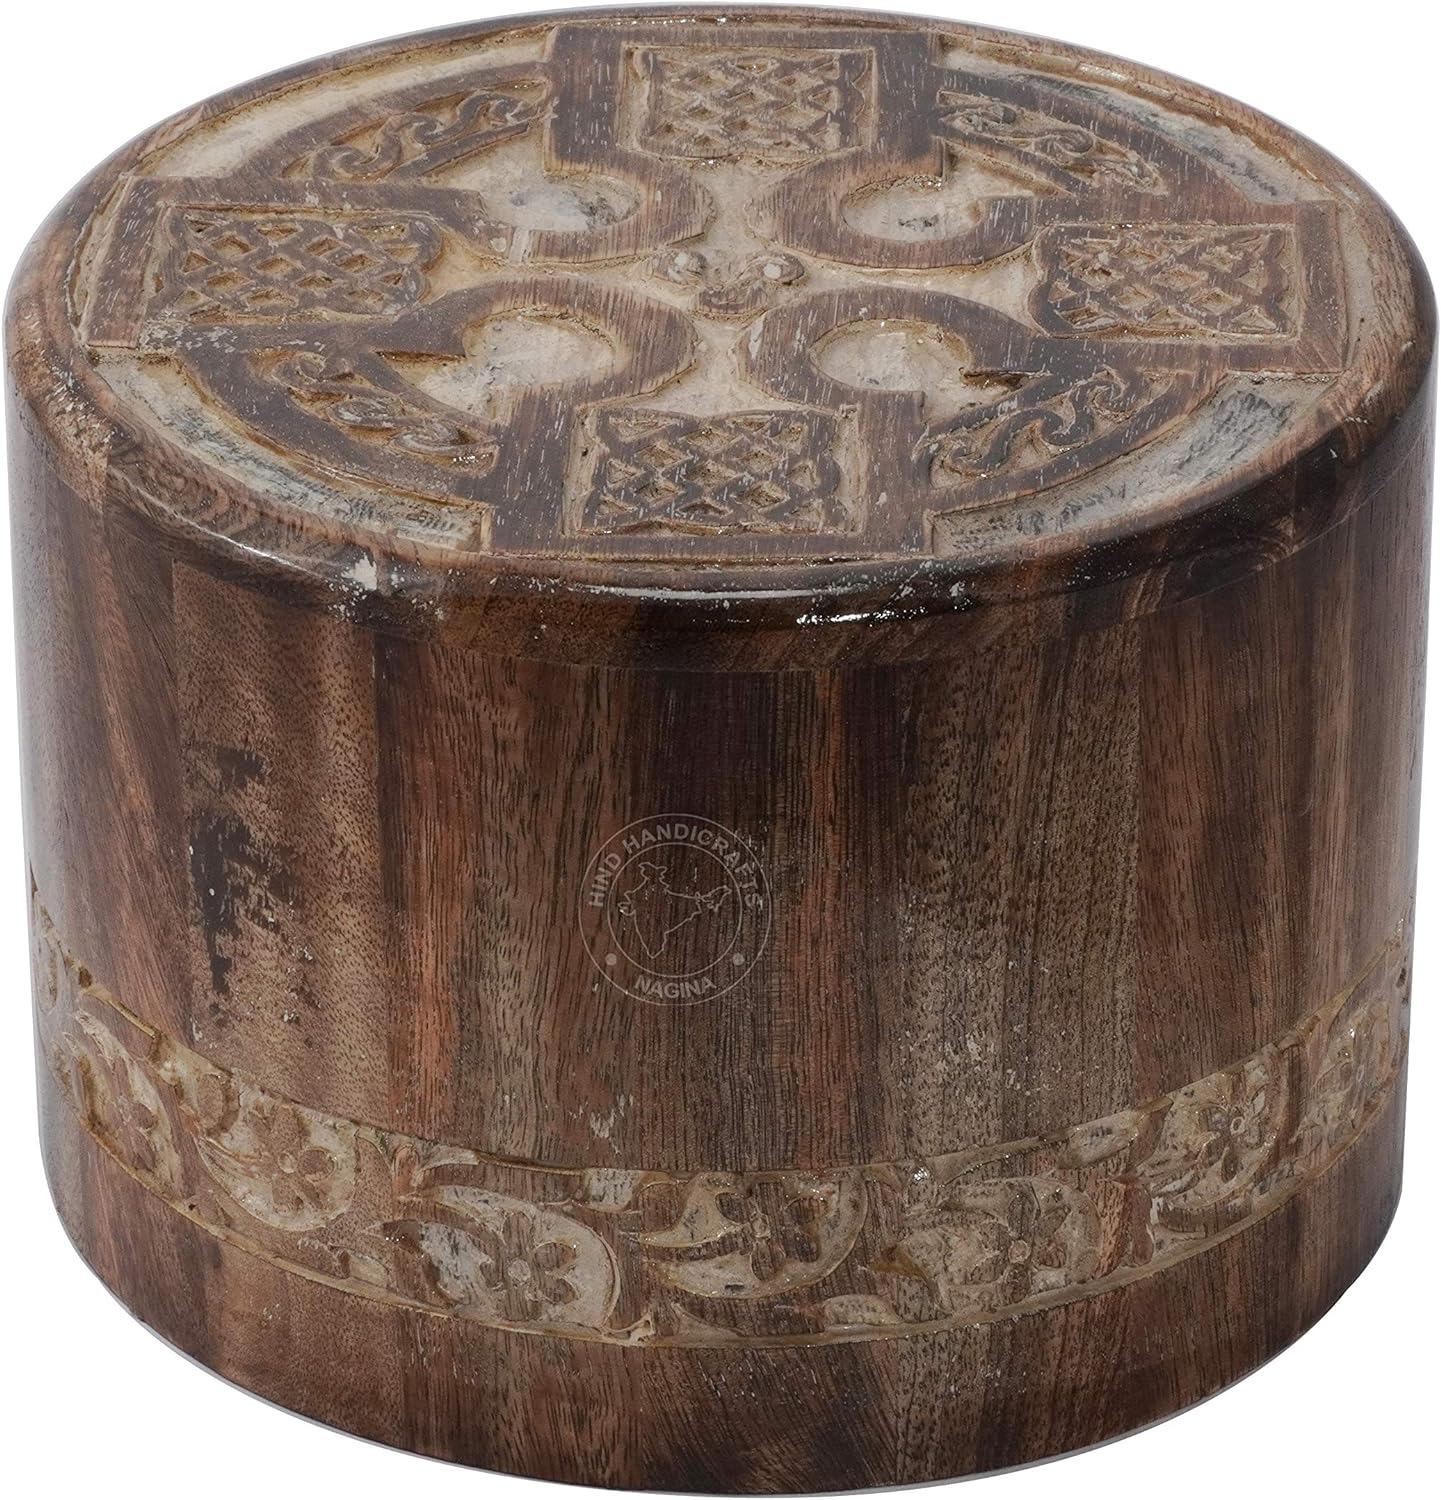 Round Wooden Engraved Urns for Human Ashes Adult - Wooden Box Rosewood Cremation